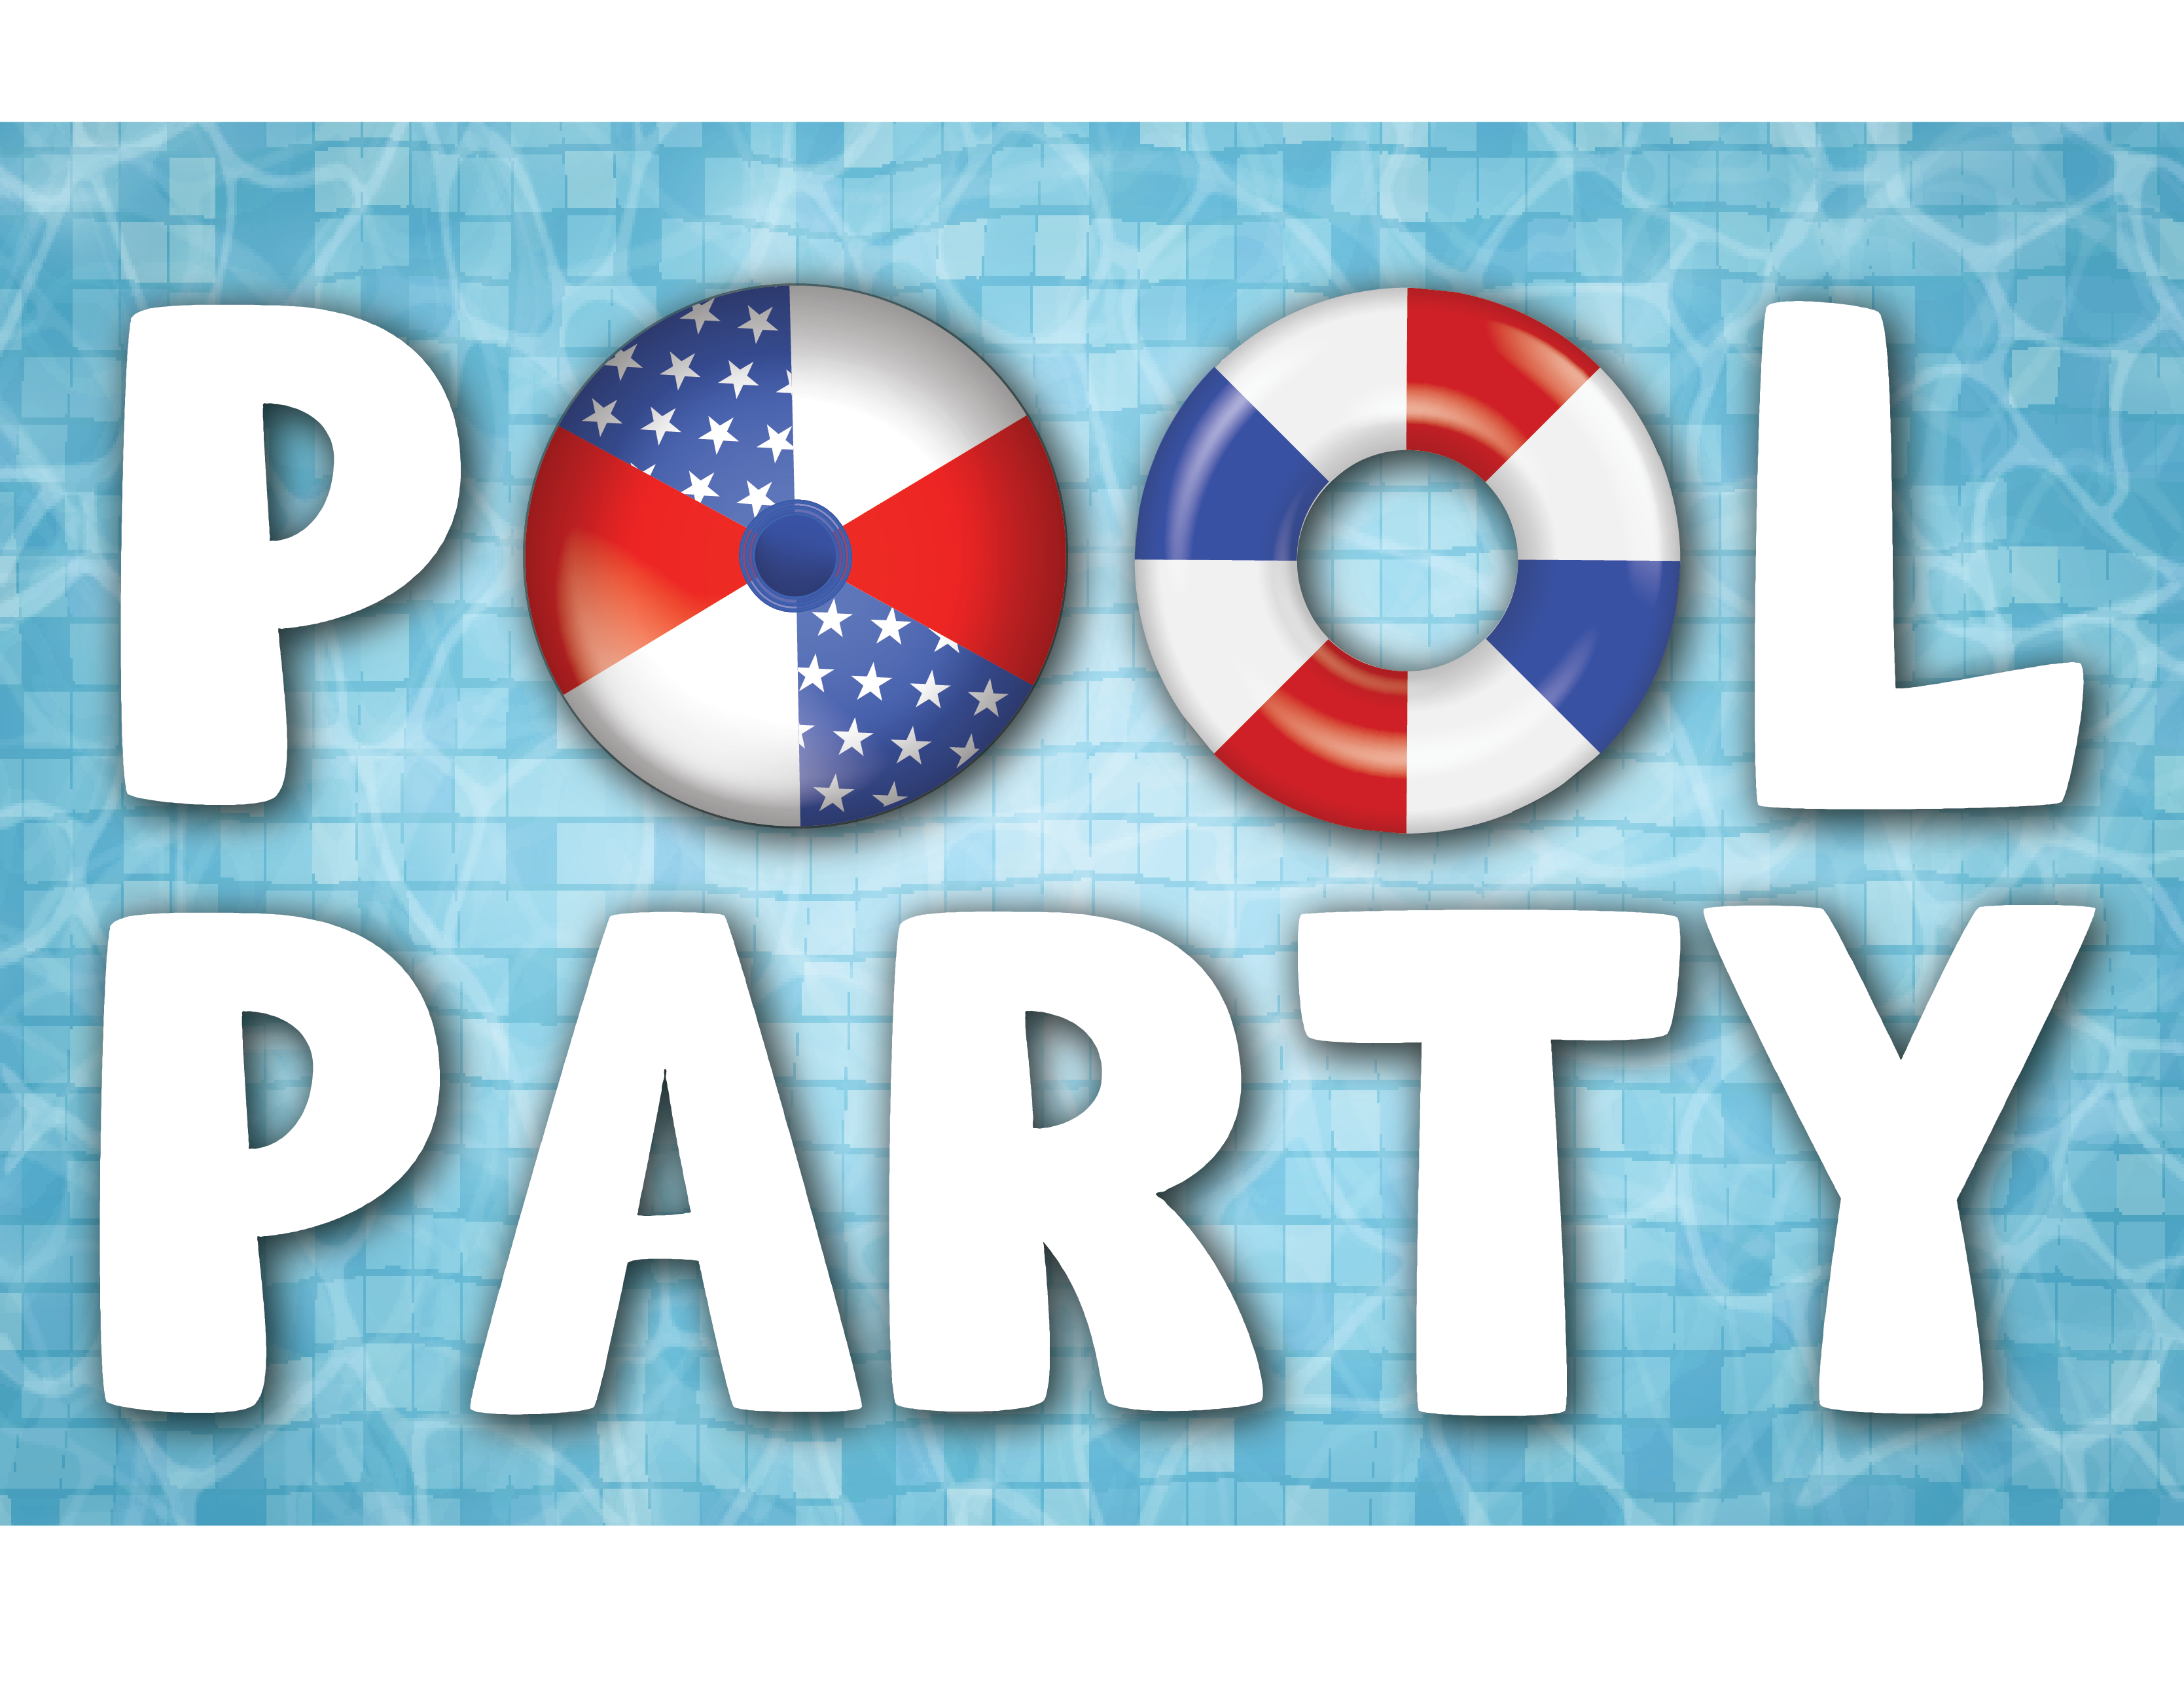 REMINDER: Grayson Lakes Community Pool Party on July 3